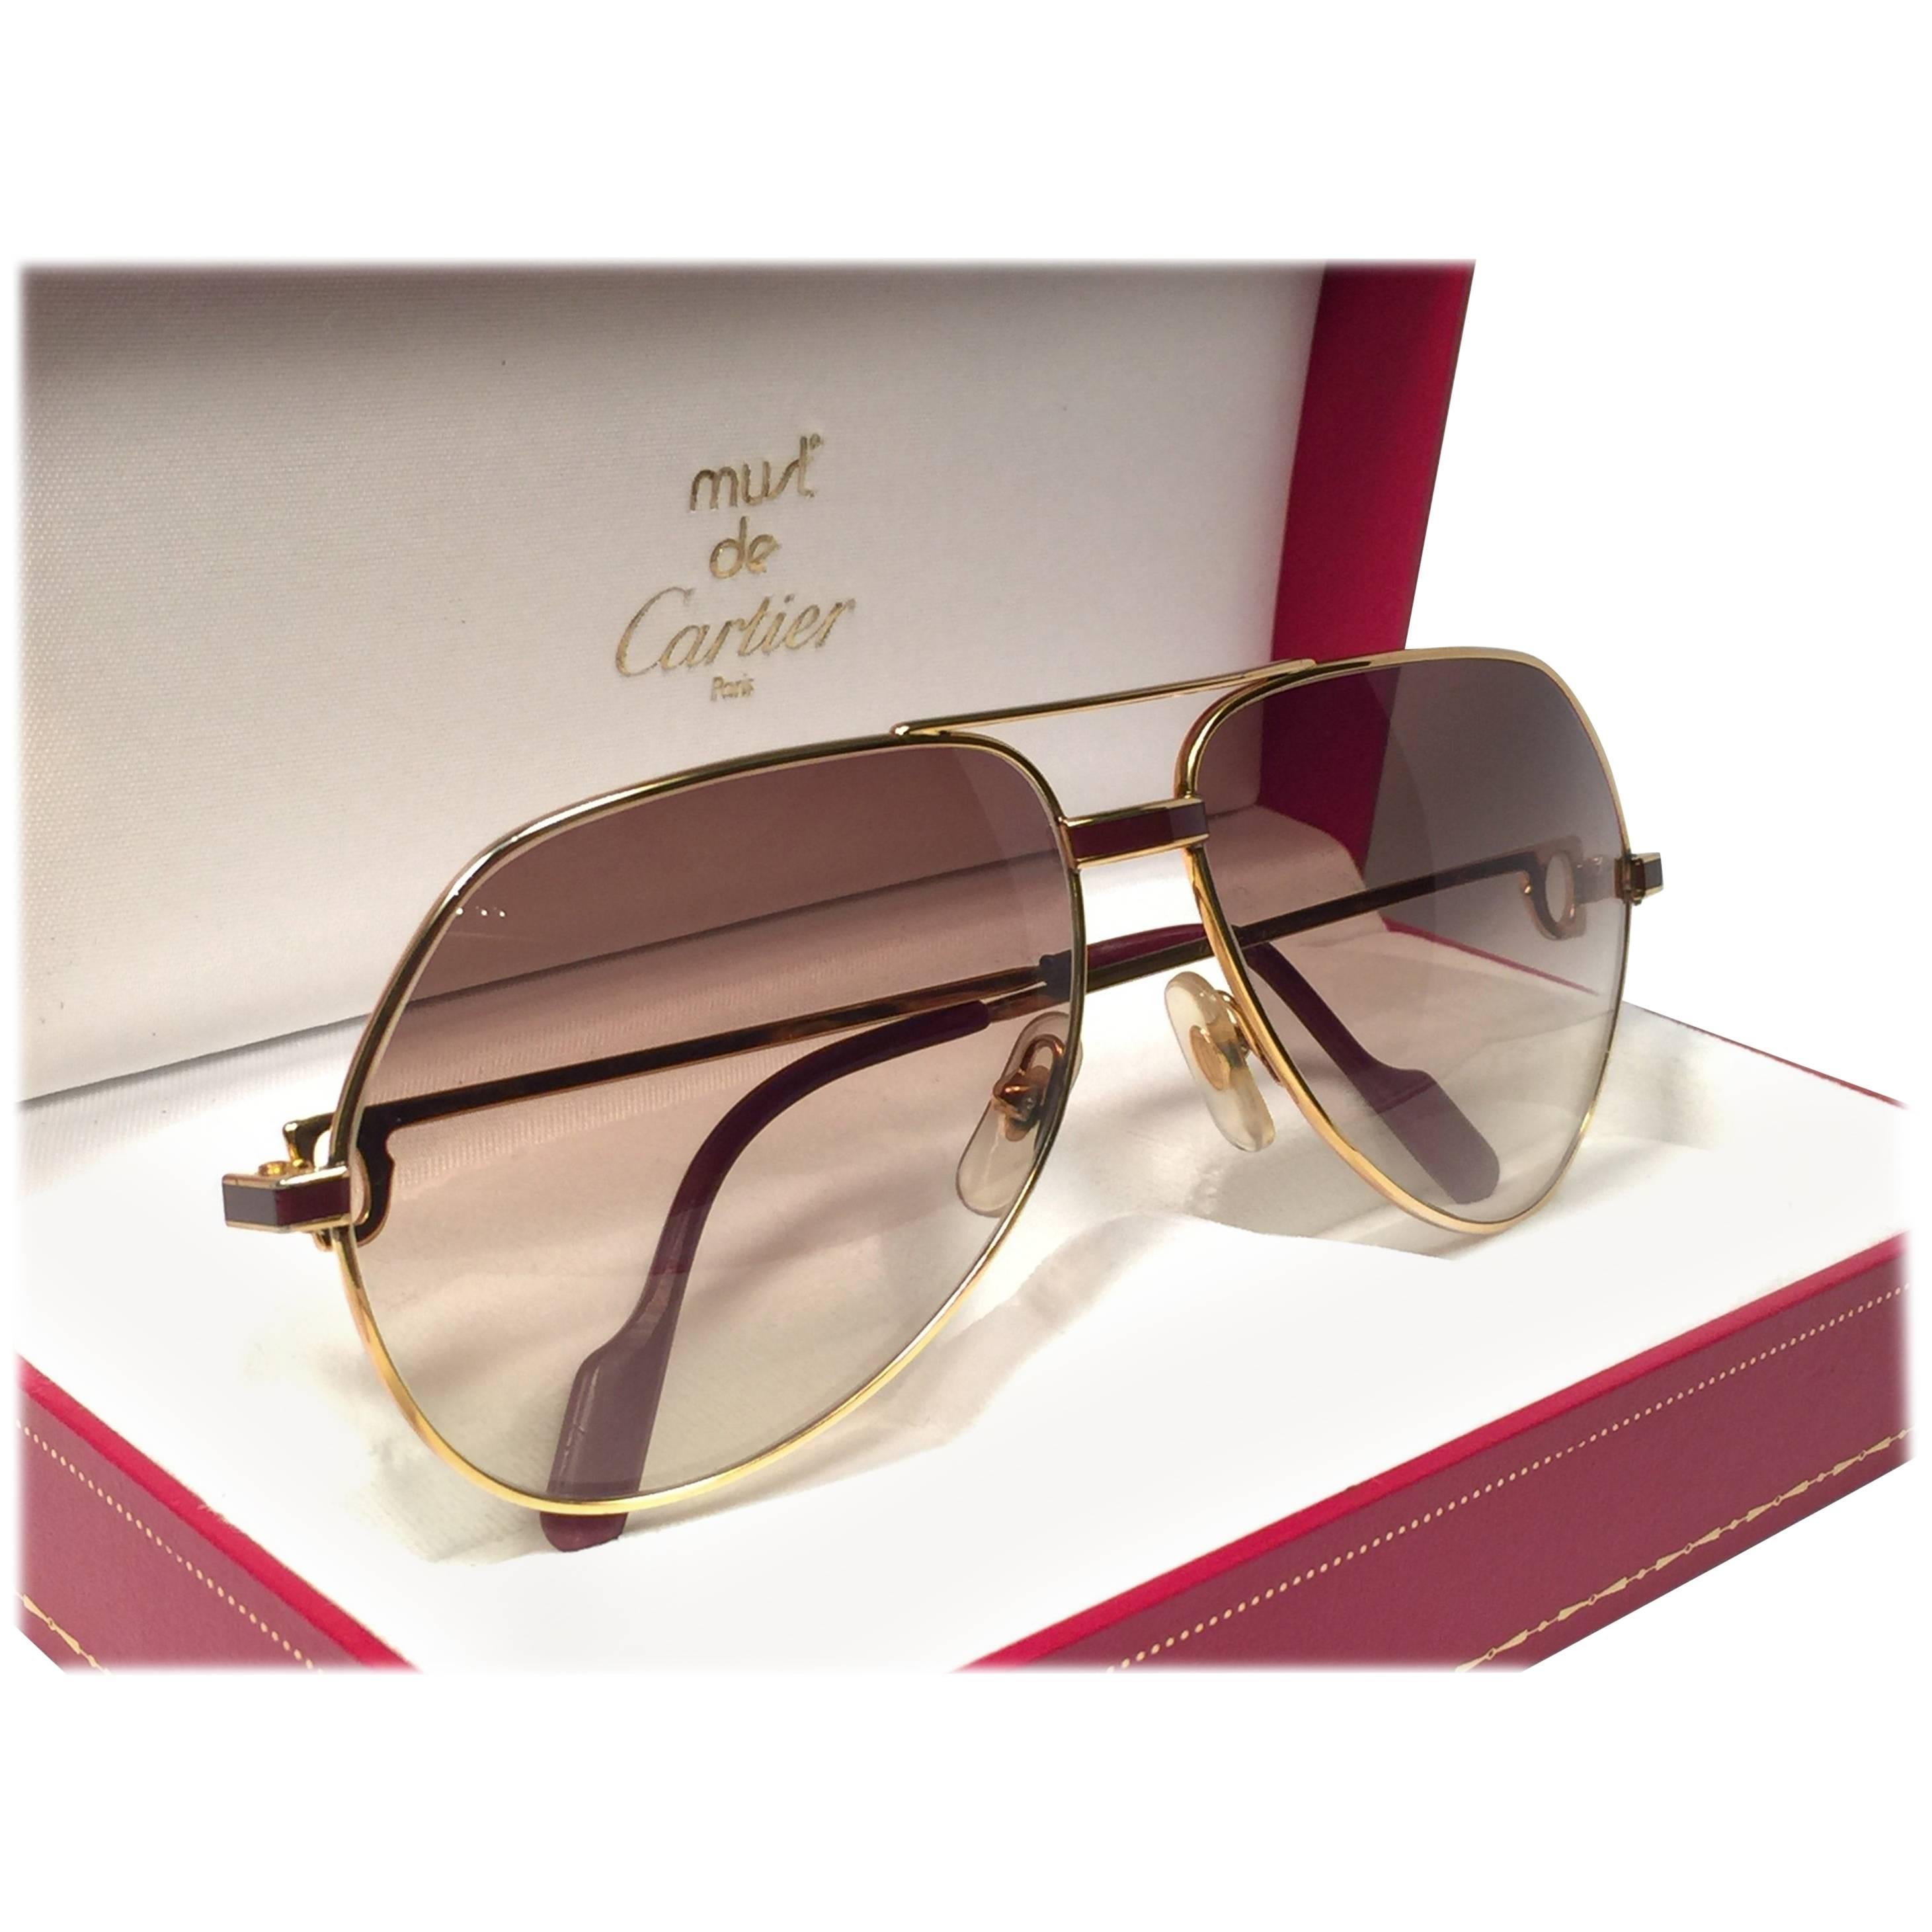 New Cartier Laque de Chine Aviator Gold 56Mm Heavy Plated Sunglasses France